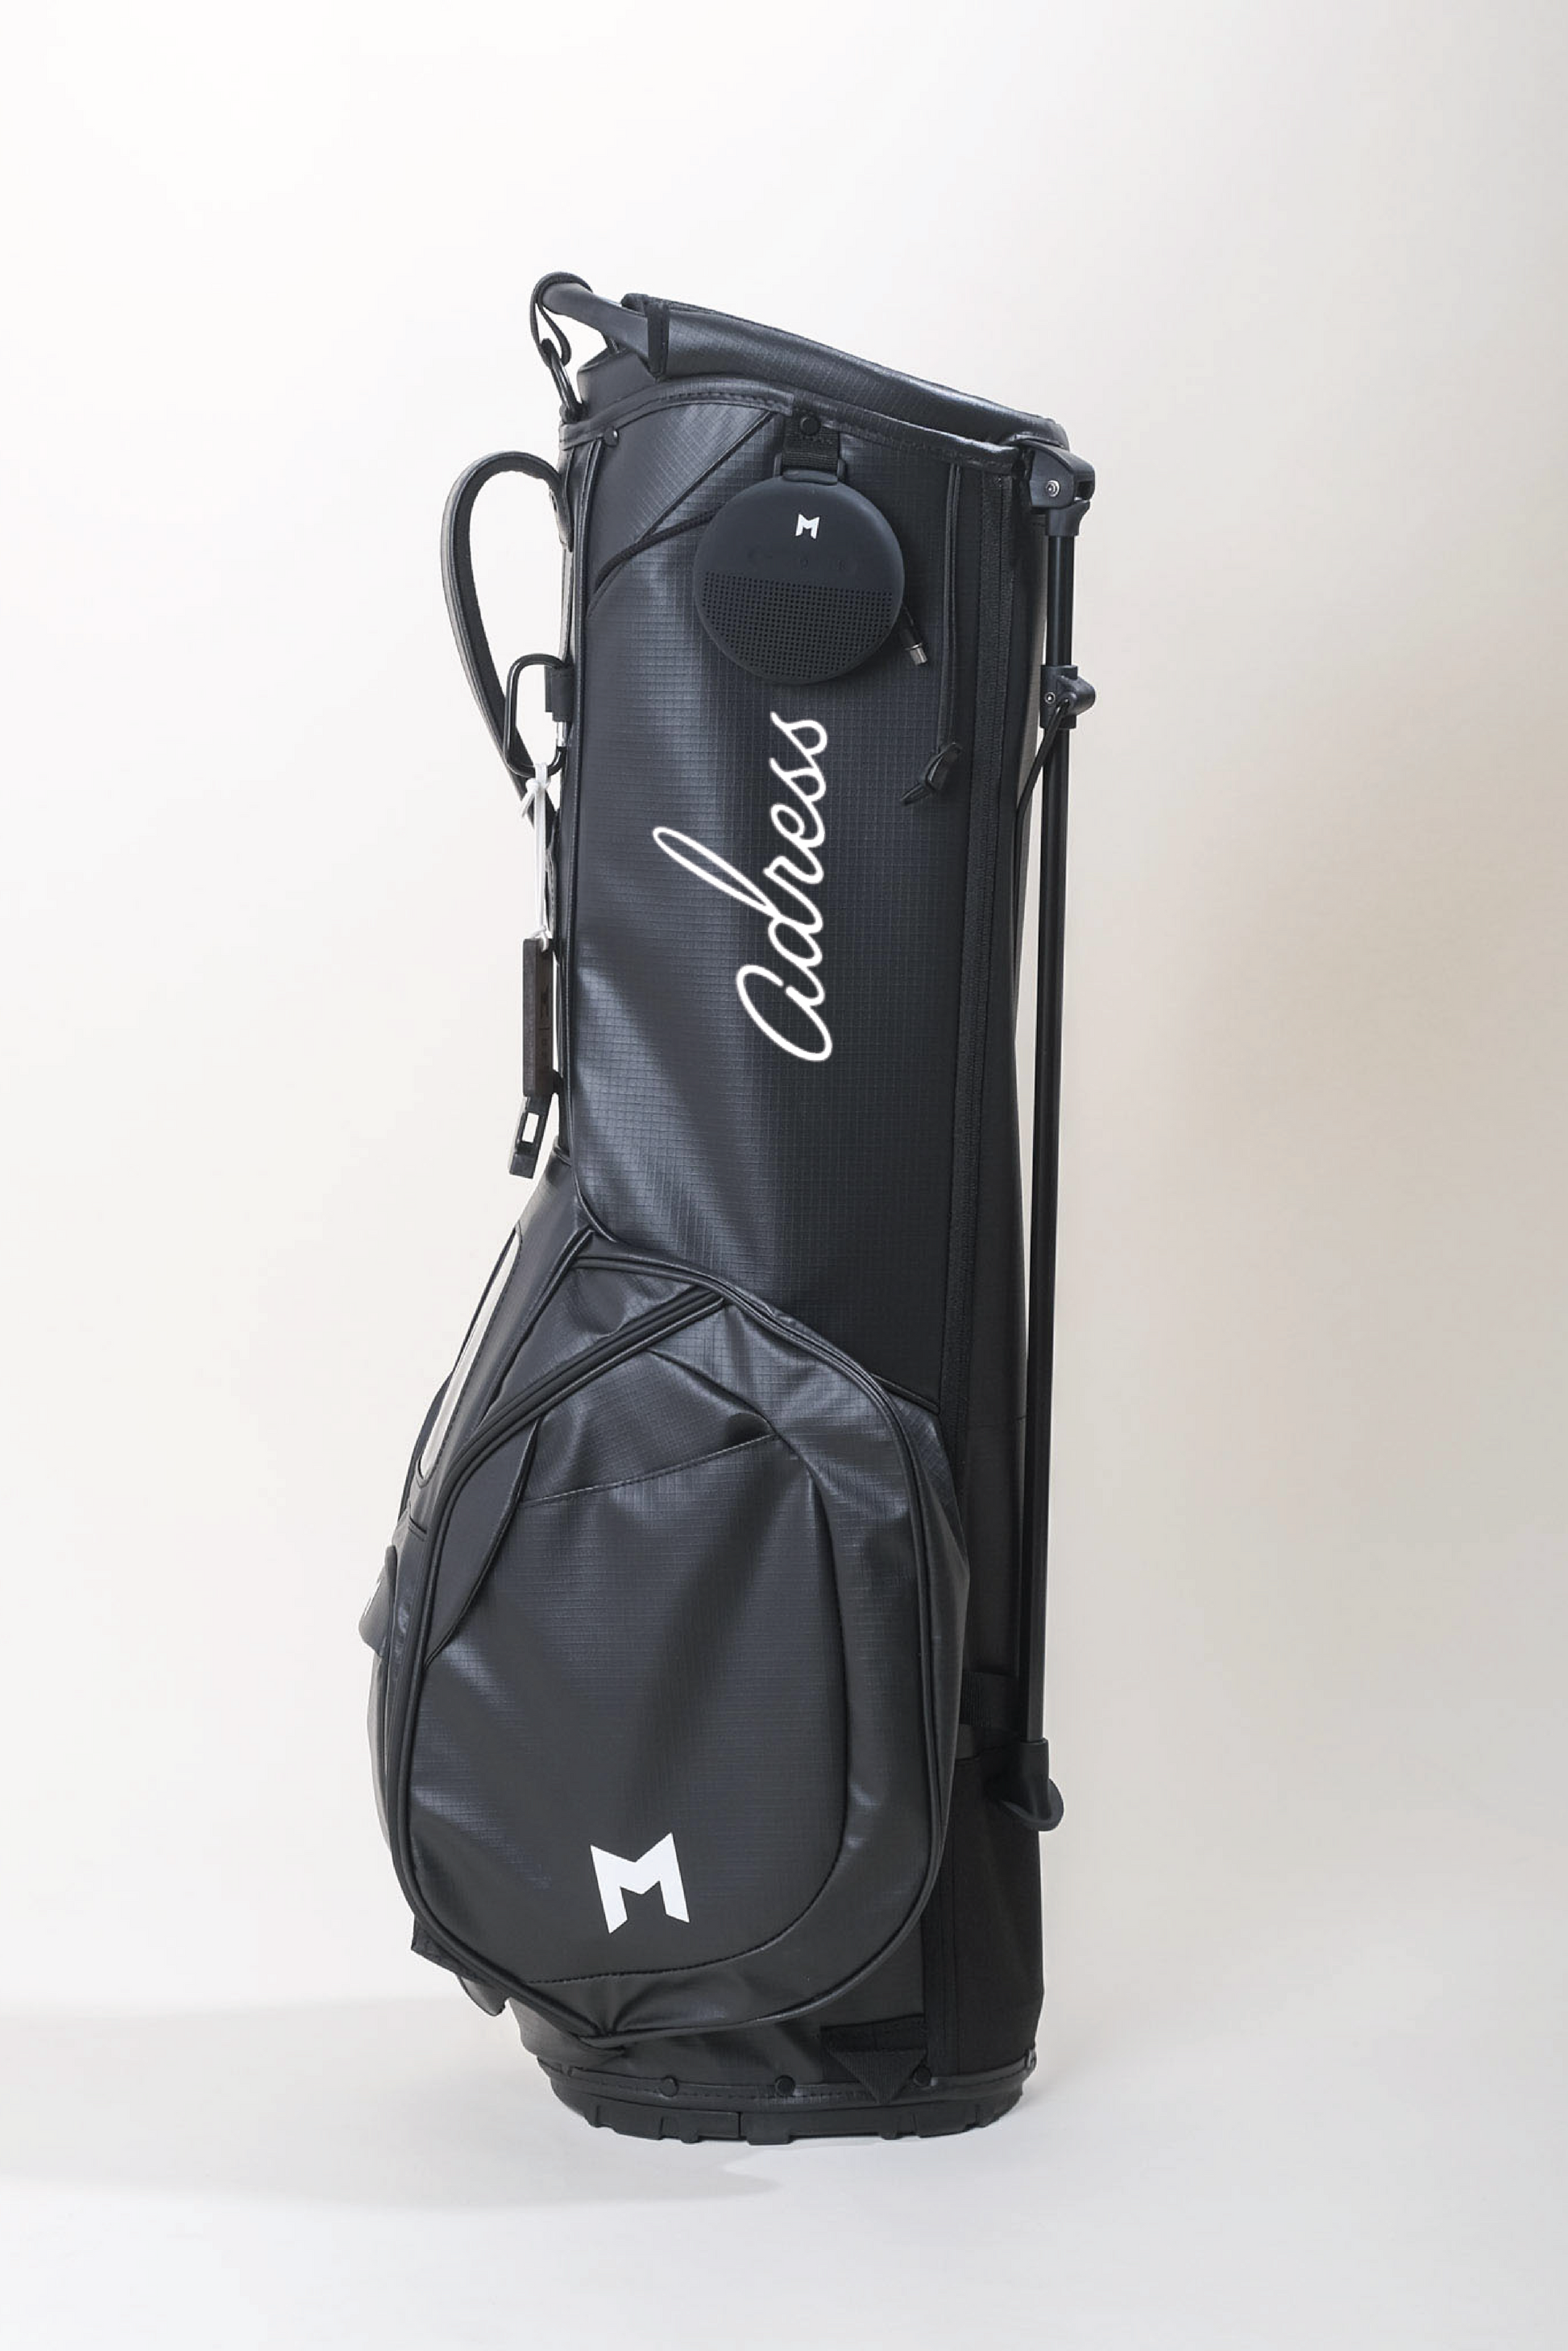 MNML GOLF collaborated with Adress golf on an MR1 model, made from recycled material.